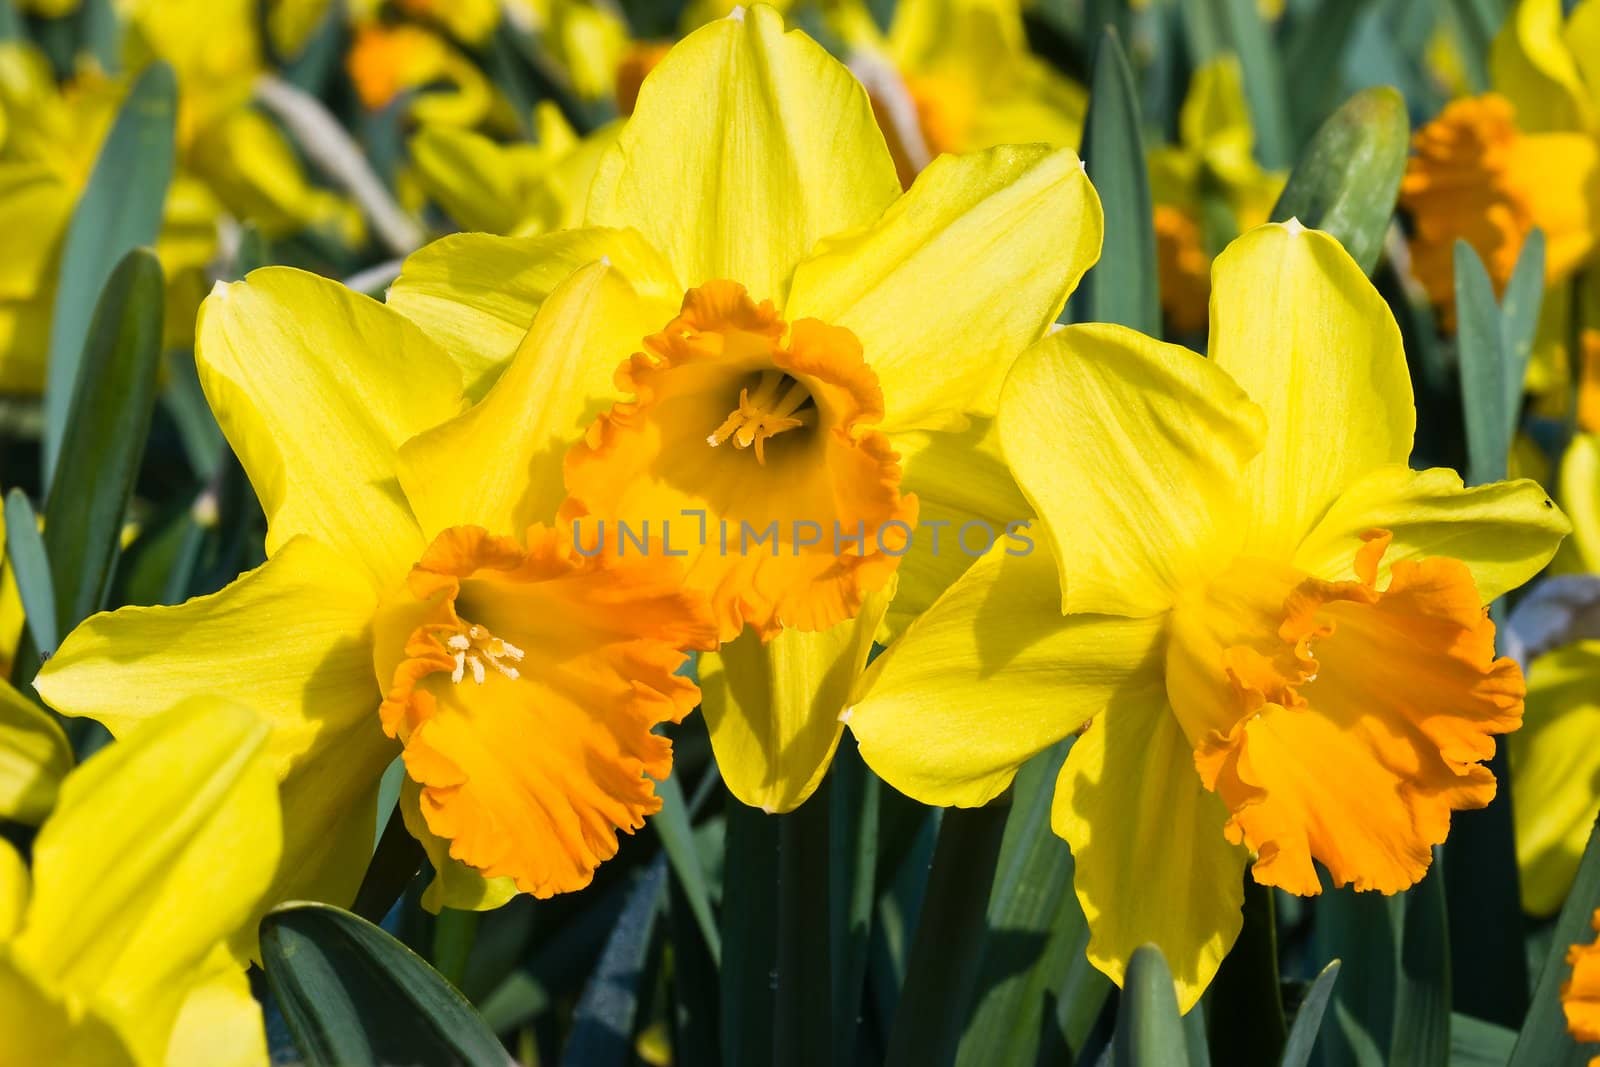 Orange and yellow daffodils in spring by Colette